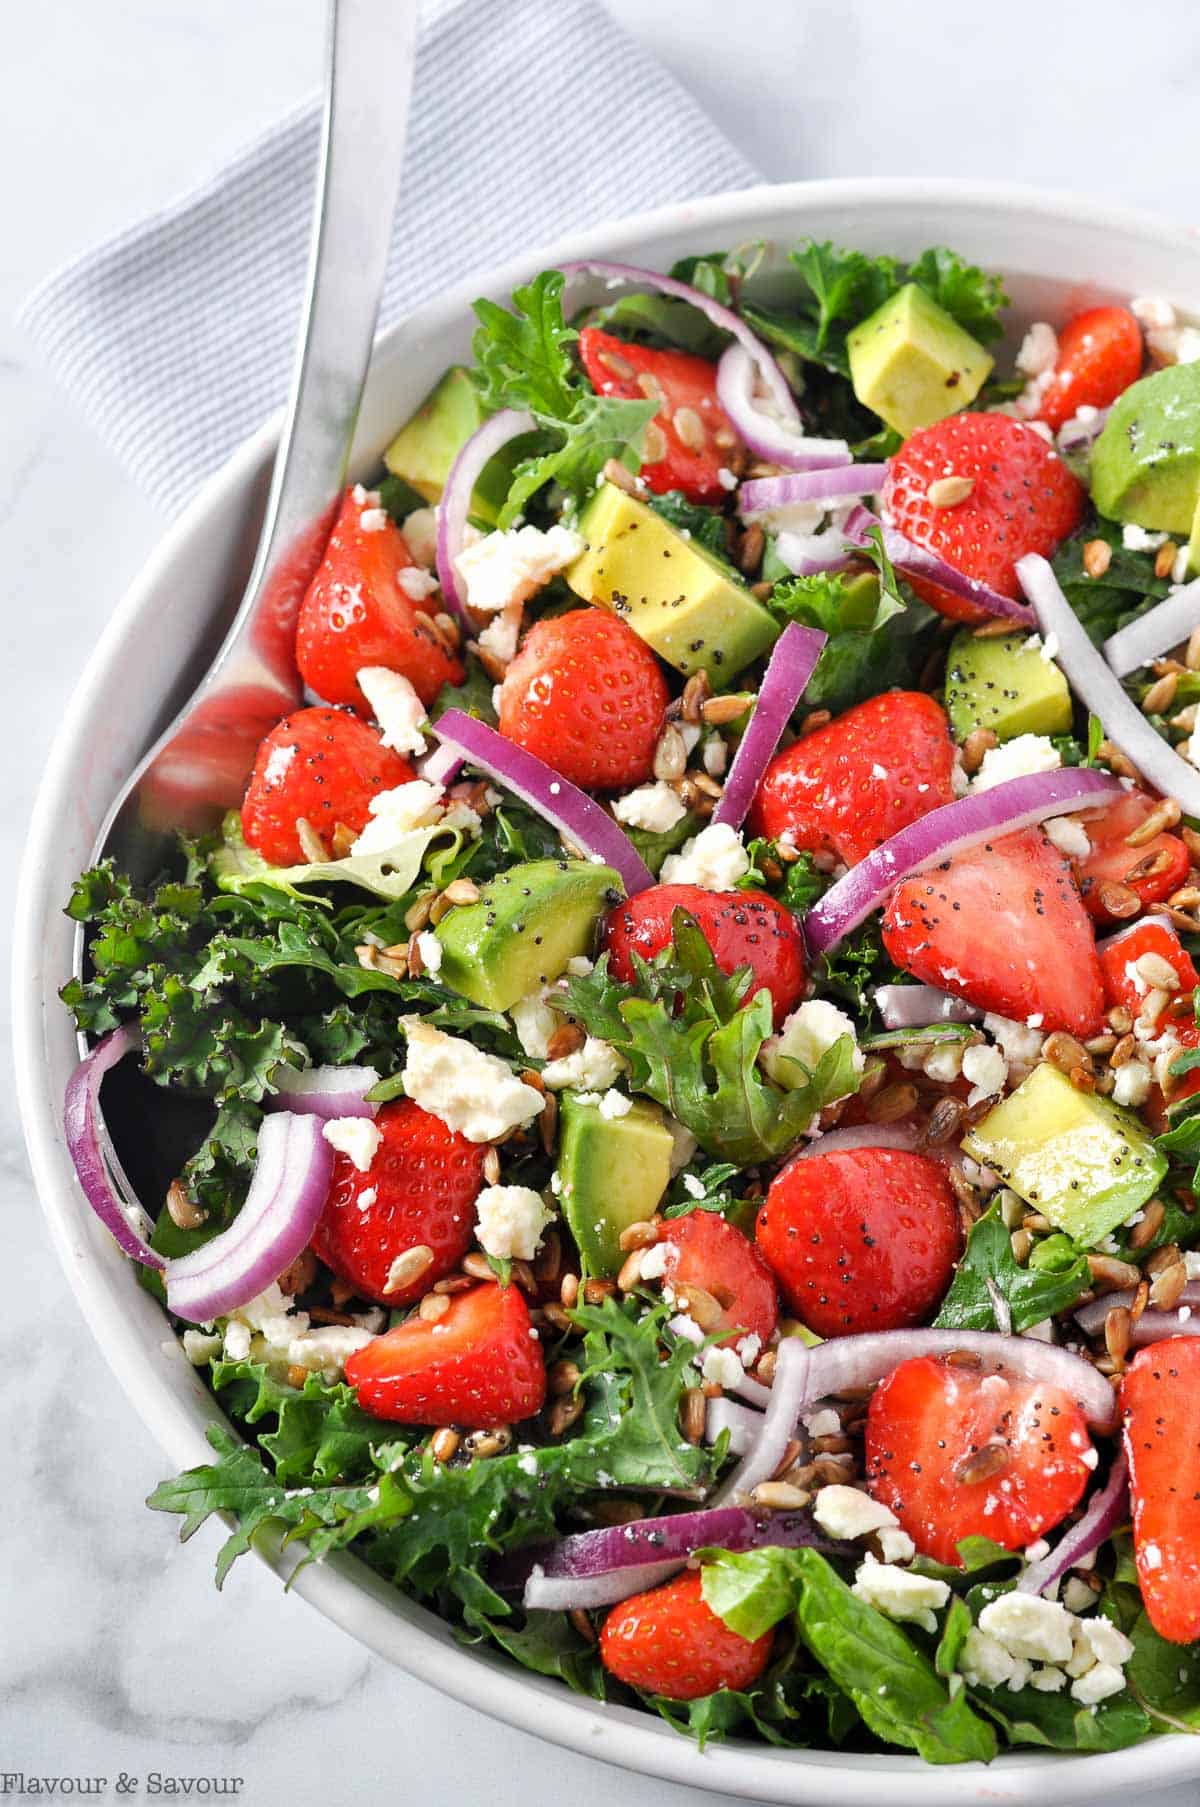 Strawberry Kale Salad with feta, avocado, red onion and toasted sunflower seeds.